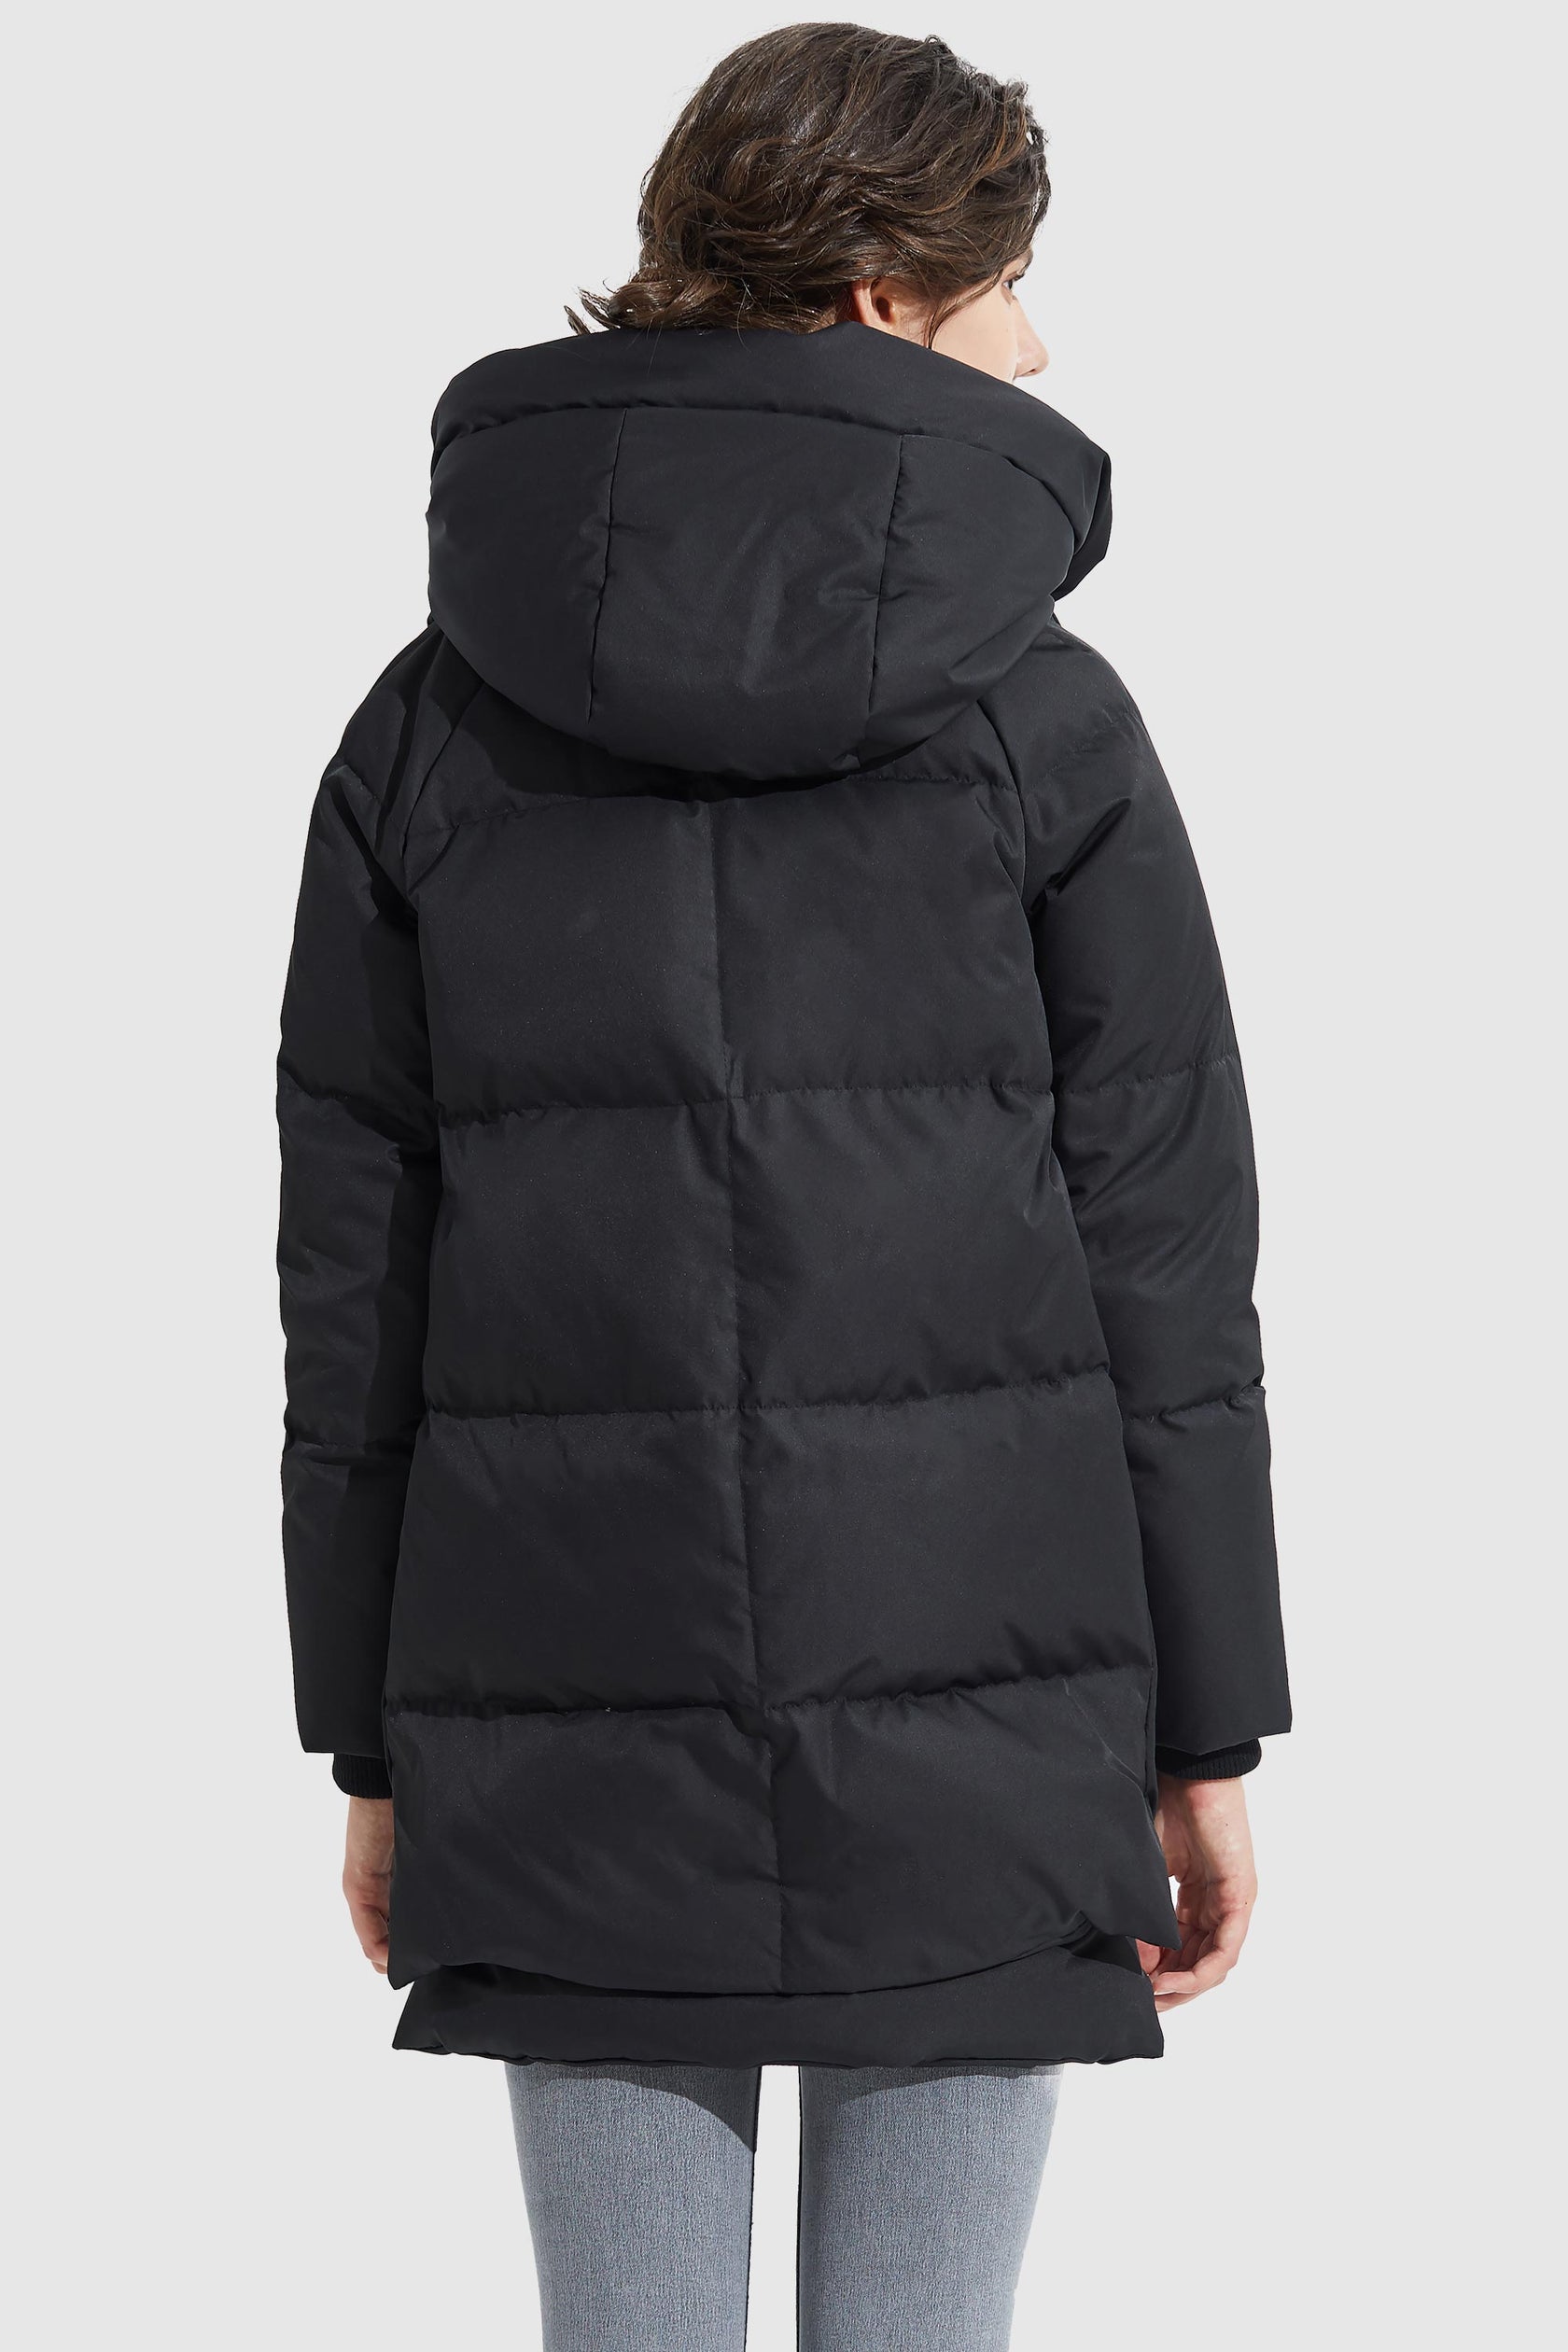 Orolay Women's Thickened Down Jacket | The Amazon Coat